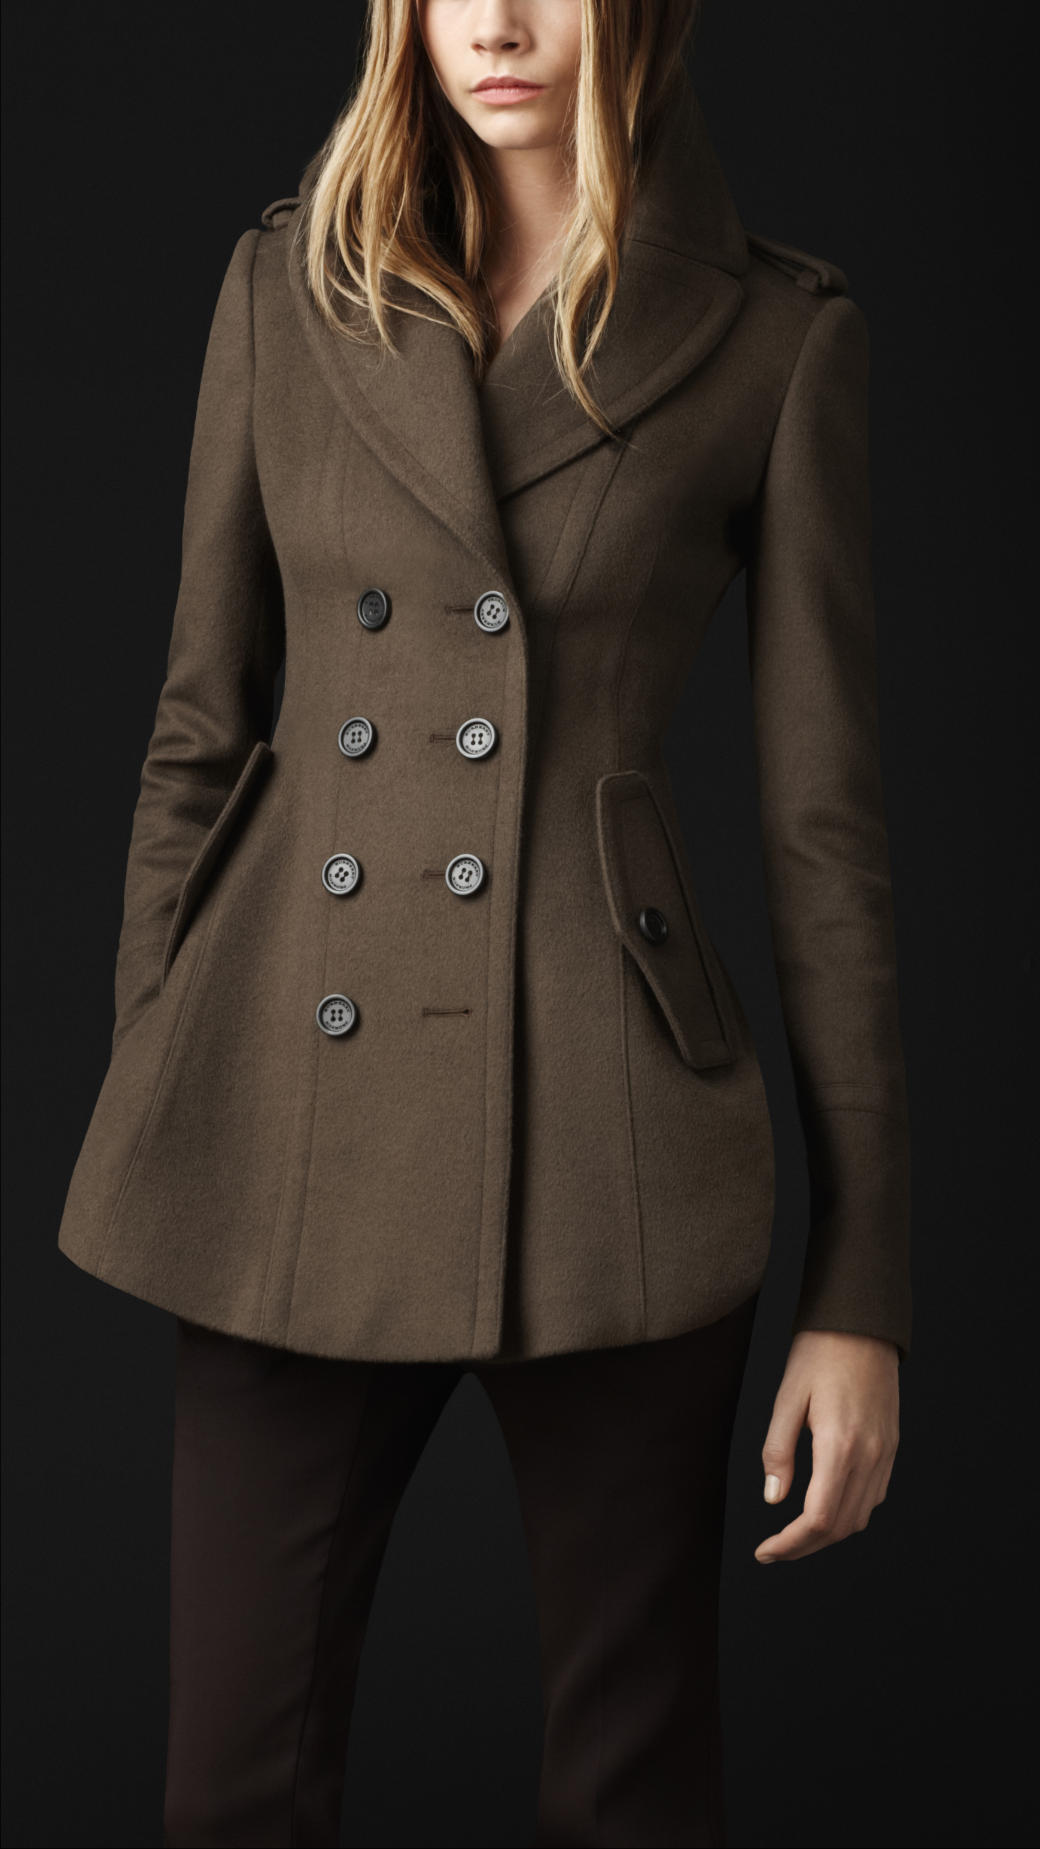 Lyst - Burberry Prorsum Wool Cashmere Tailored Coat in Green